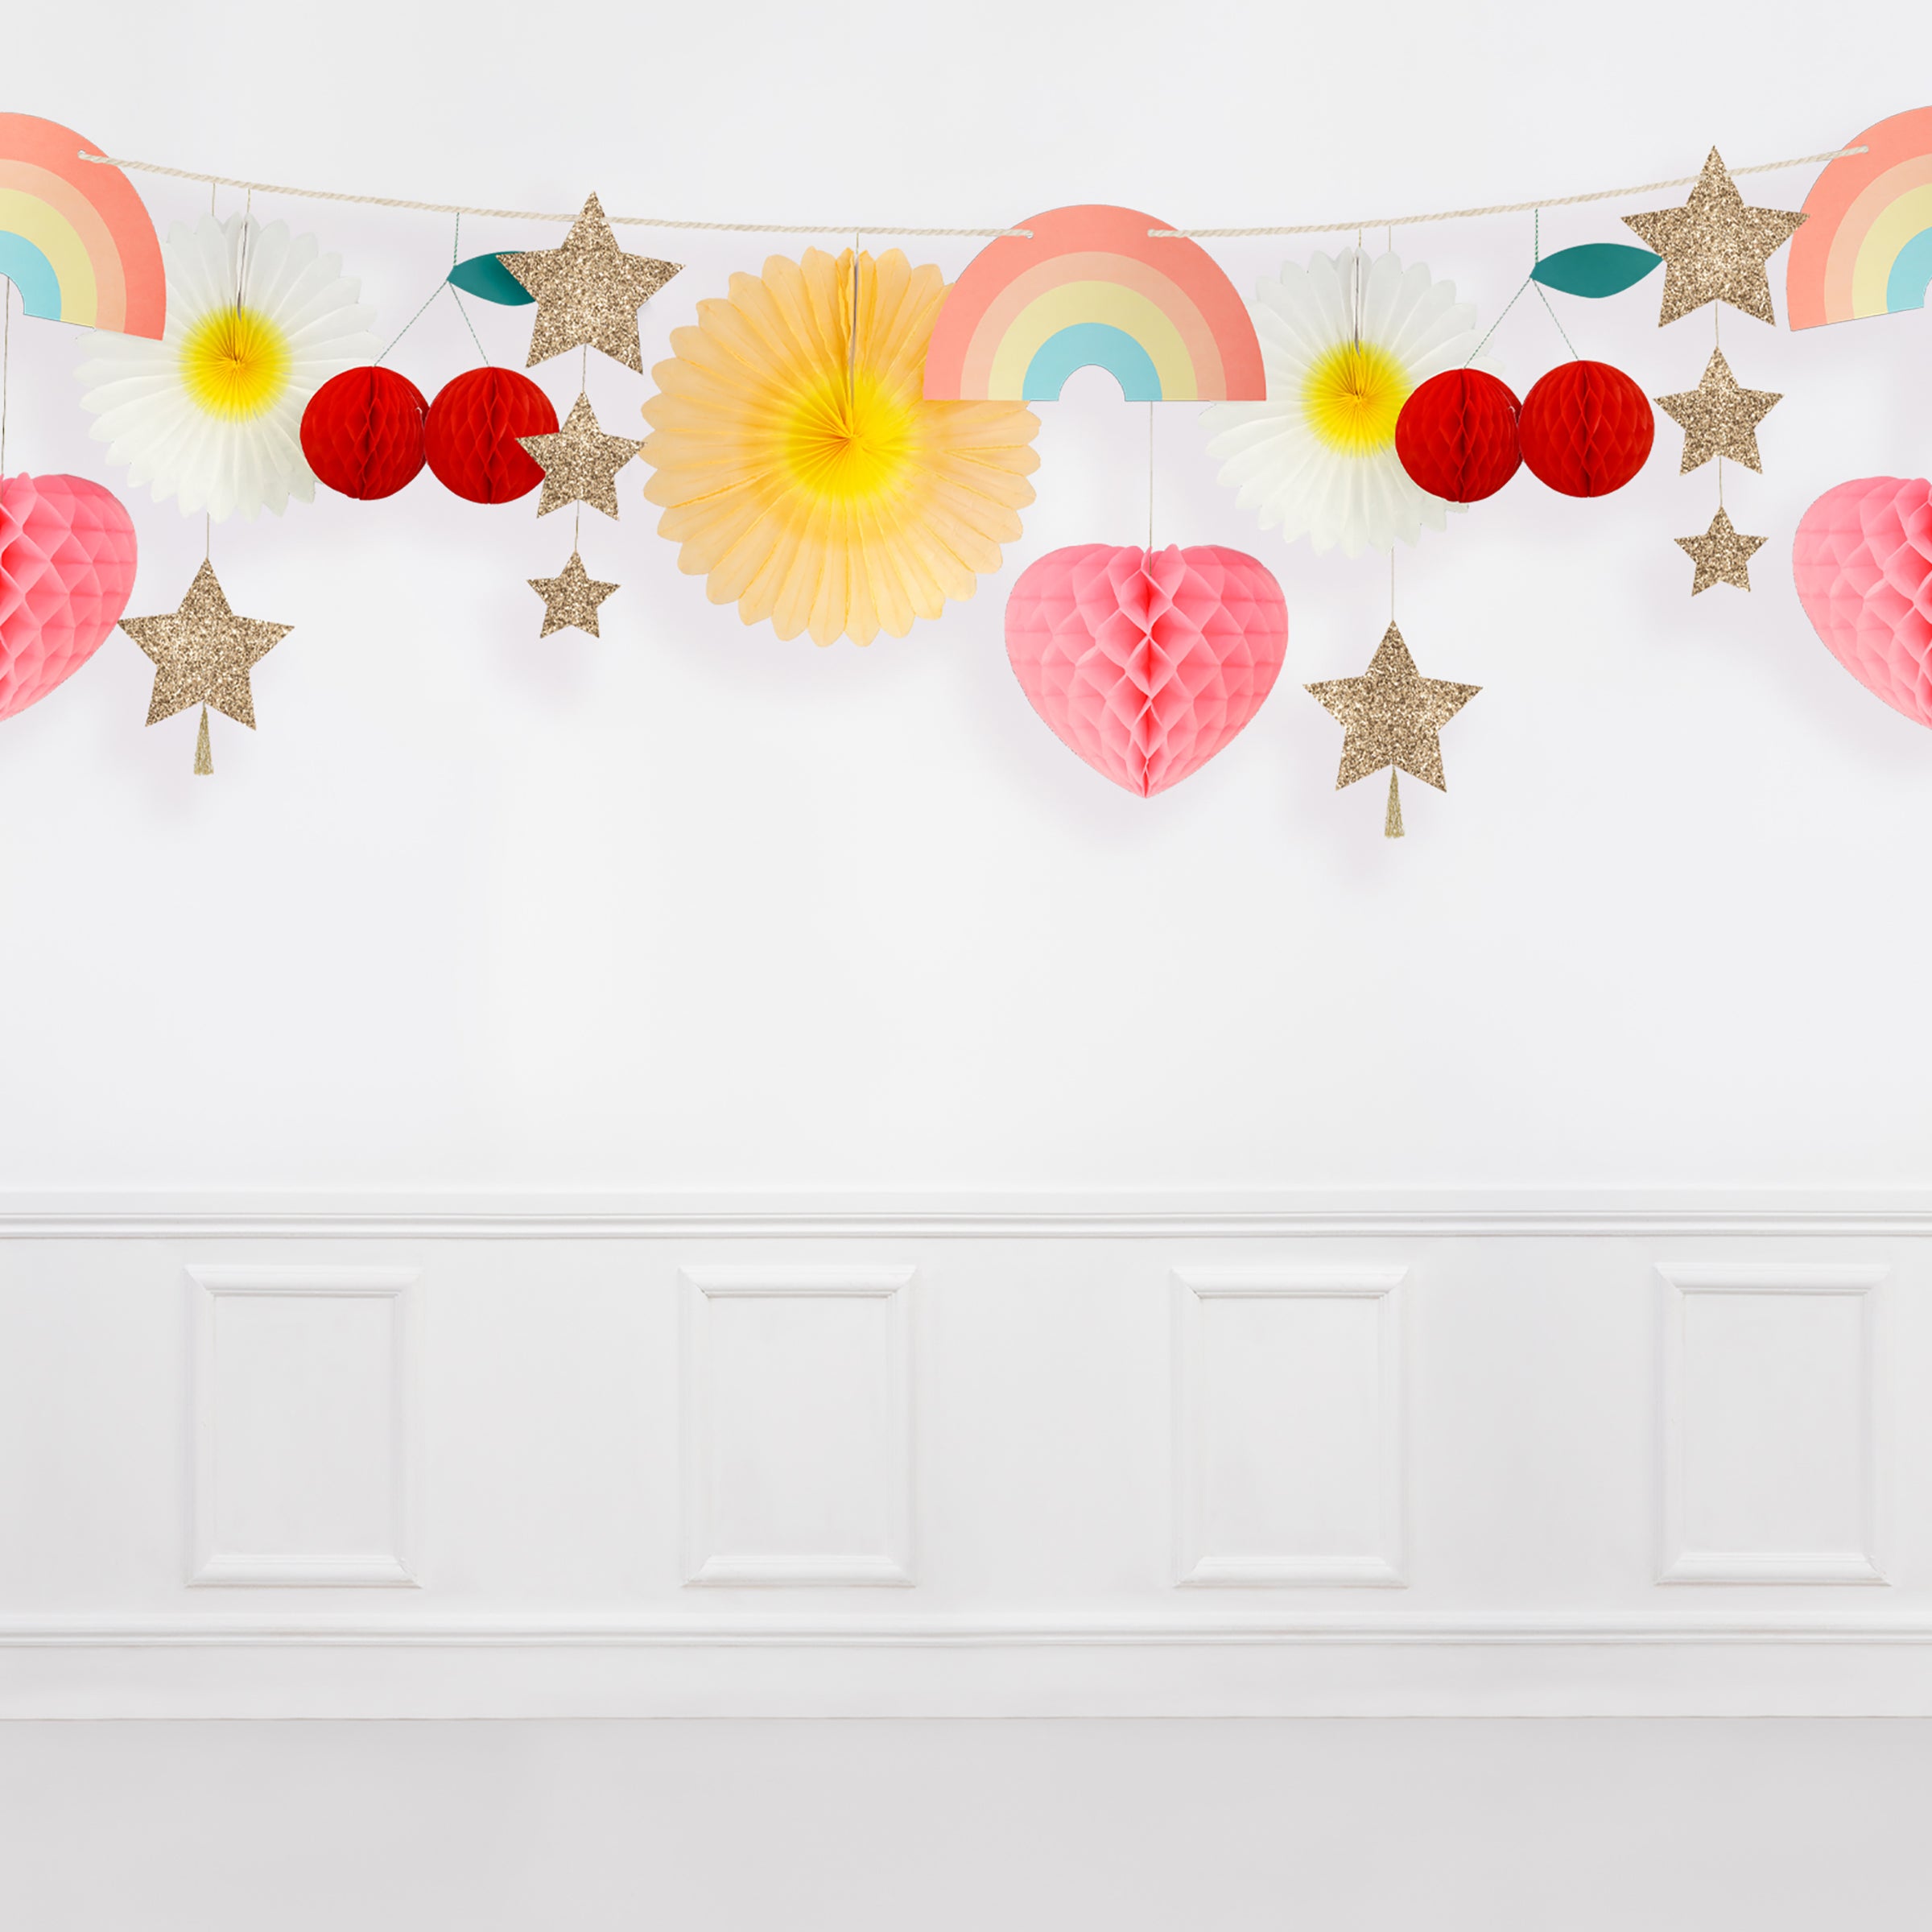 Our decorative garland features rainbows, hearts, cherries and star decorations.